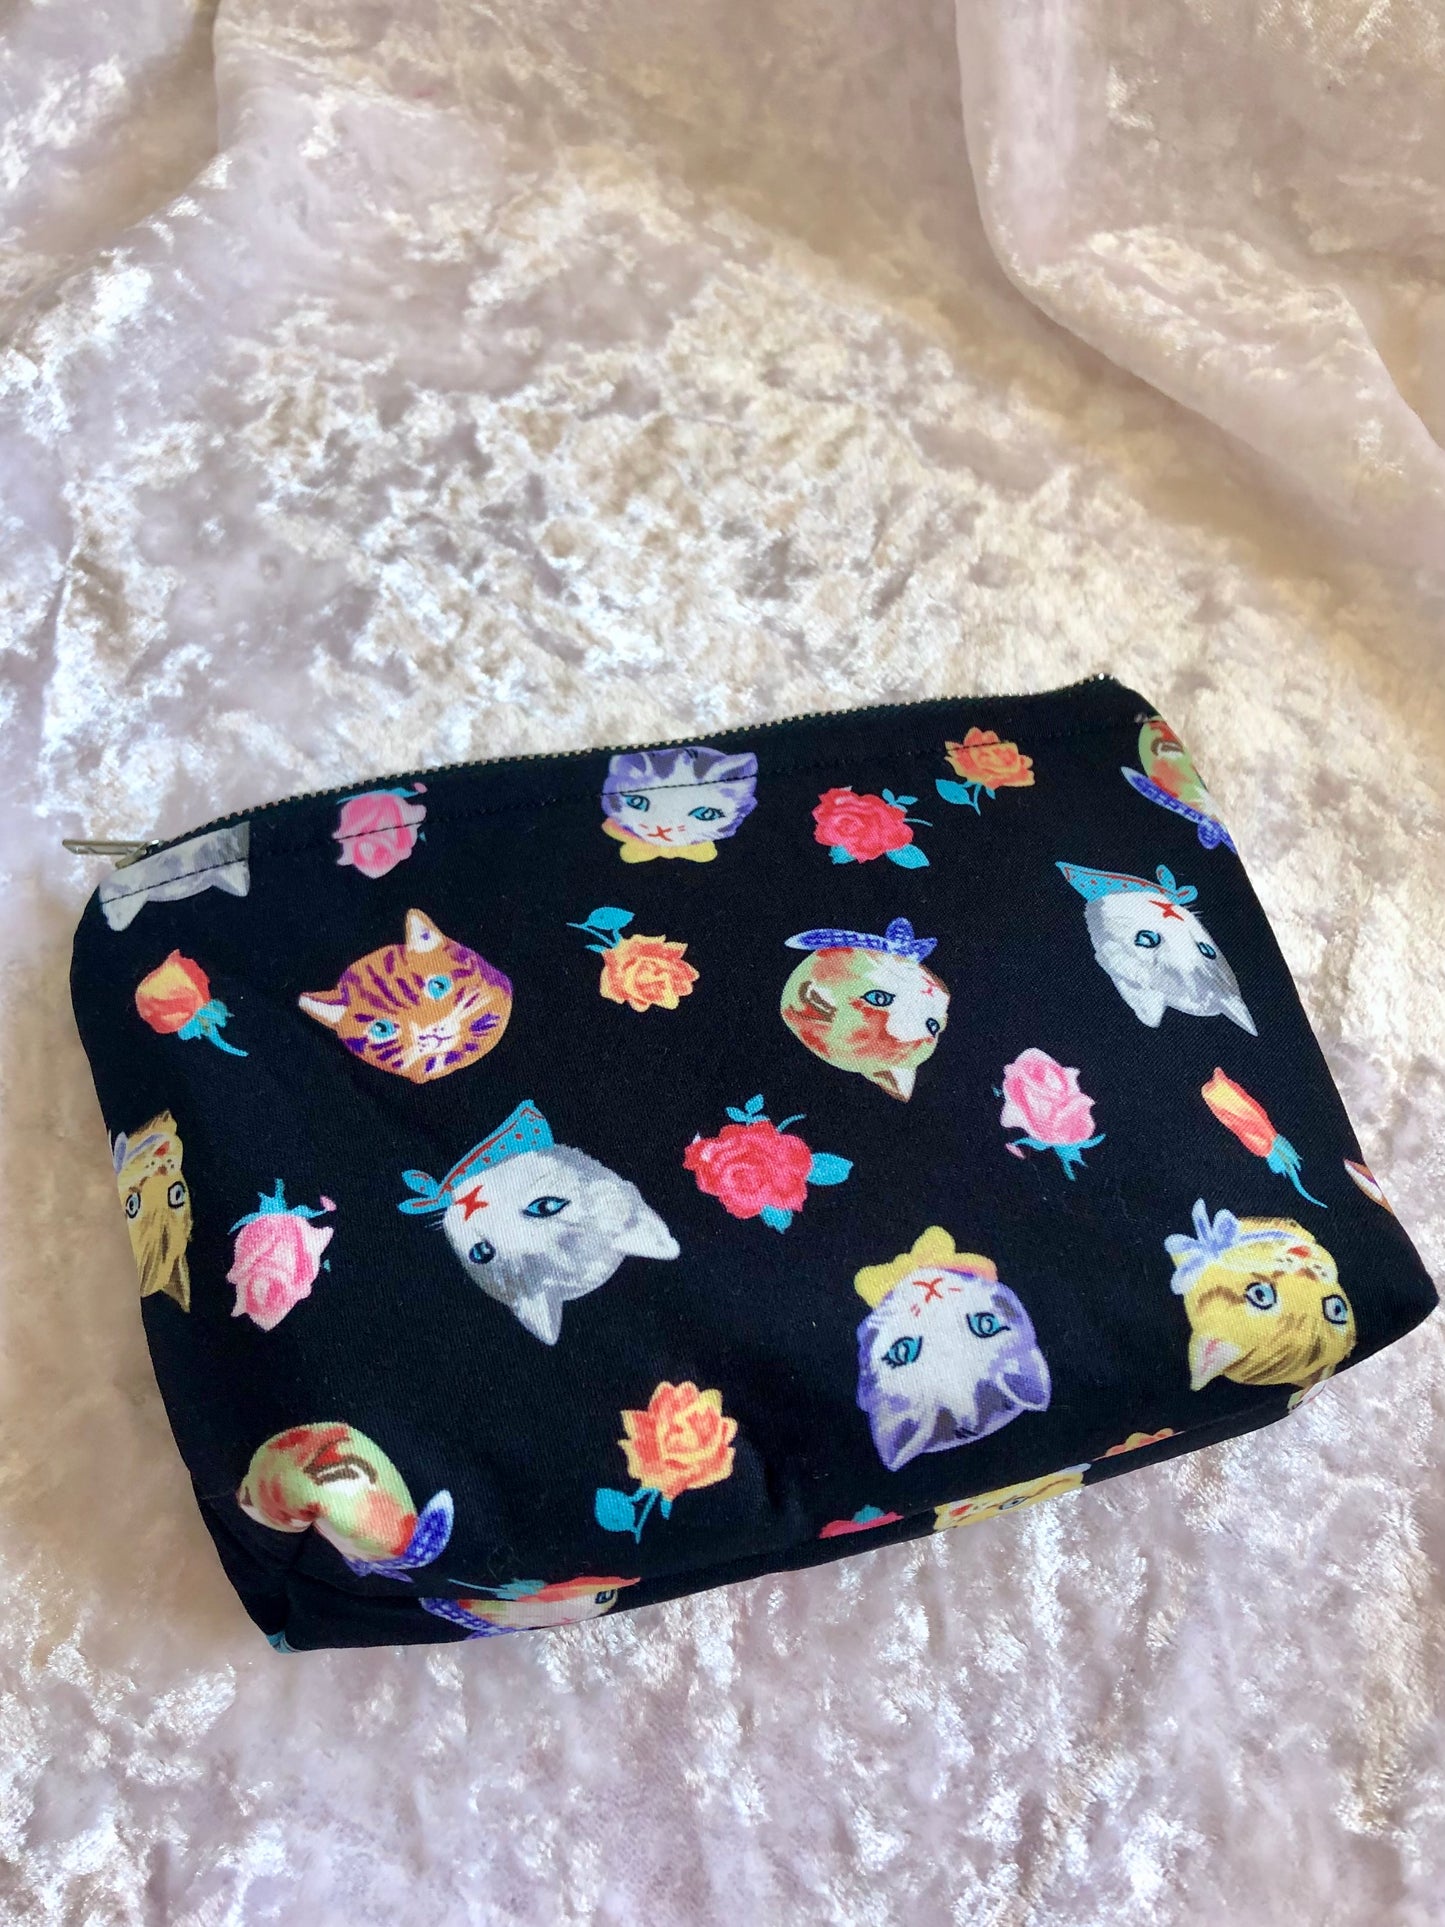 Kitsch cats & roses print zipped pouch/make up bag